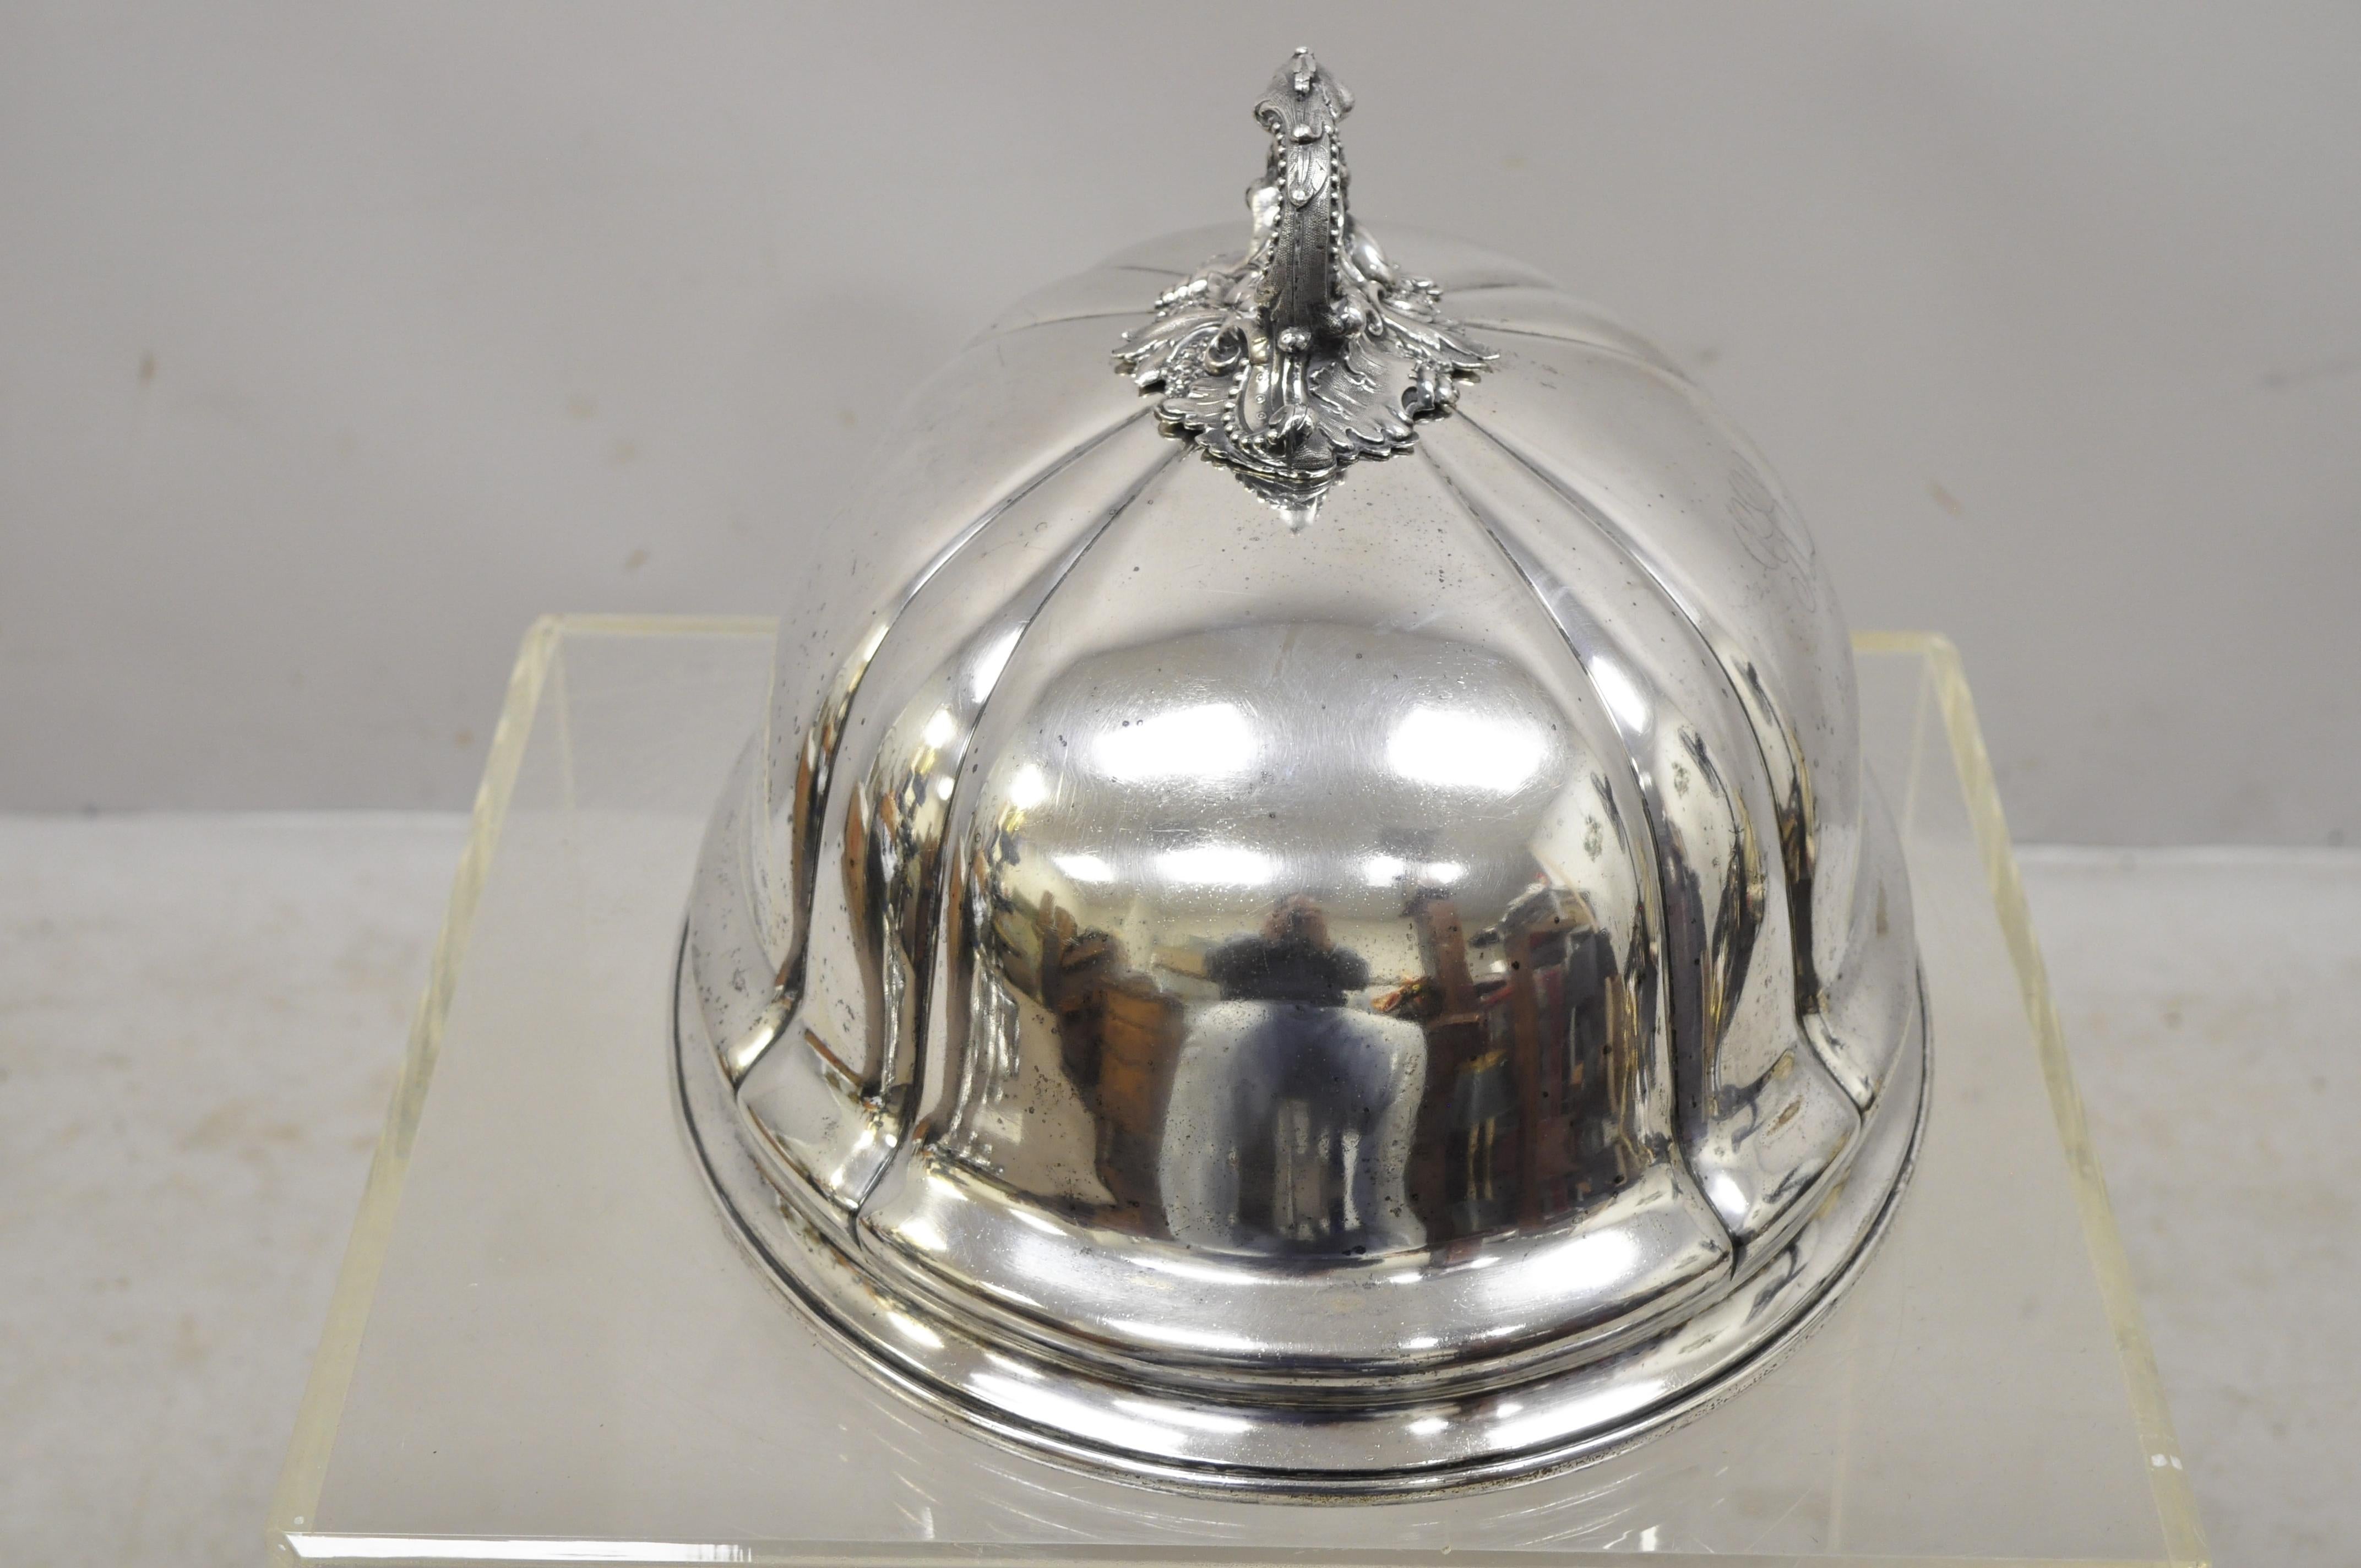 English James Dixon & Sons Sheffield England Silverplate Meat Dish Serving Dome Lid For Sale